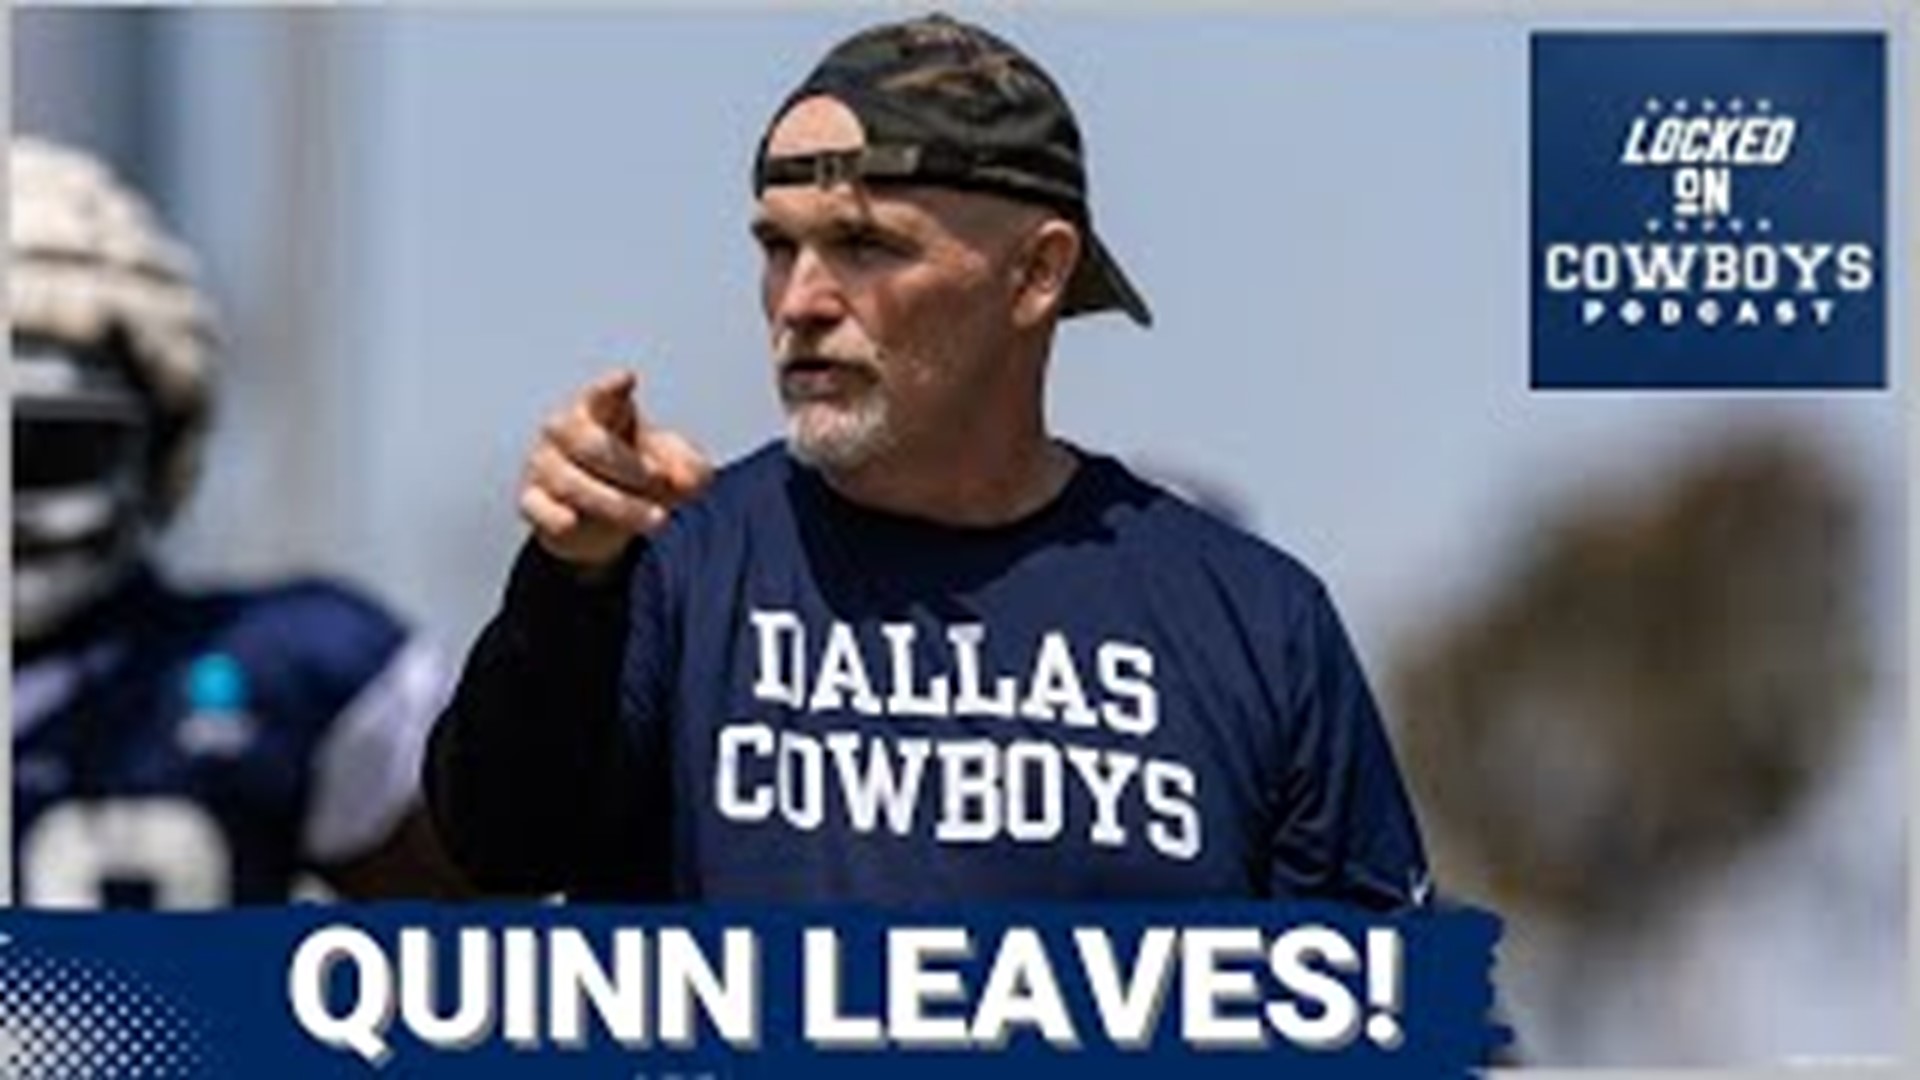 The Dallas Cowboys have officially lost Dan Quinn to the Washington Commanders. Why did Quinn leave for the Commanders now? And who is expected to replace him?